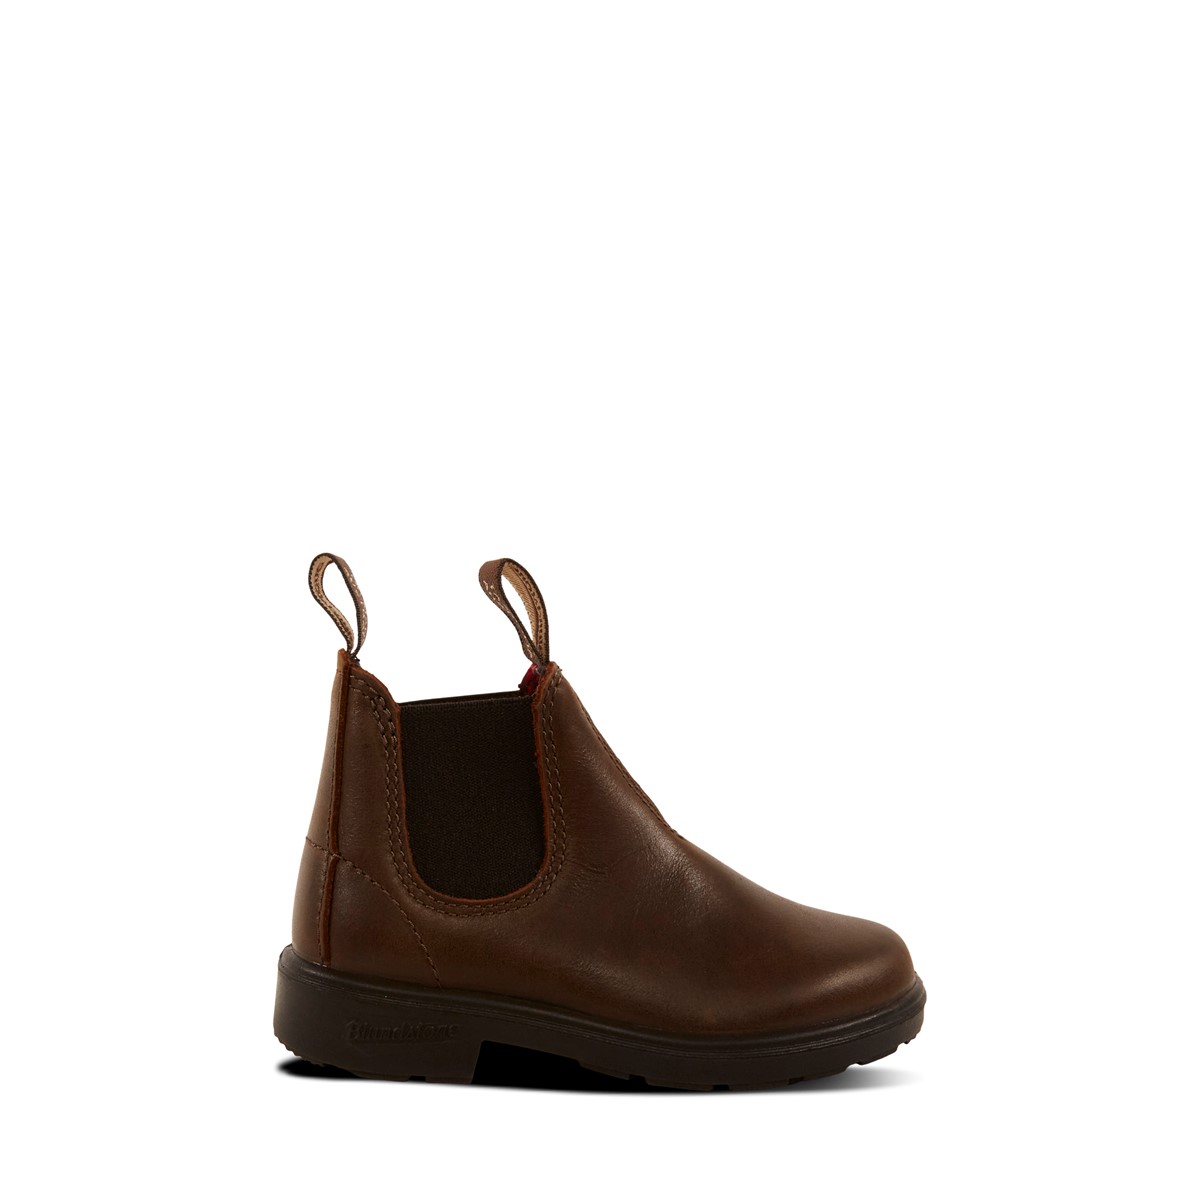 Little Kids' 1468 Chelsea Boots in Antique Brown